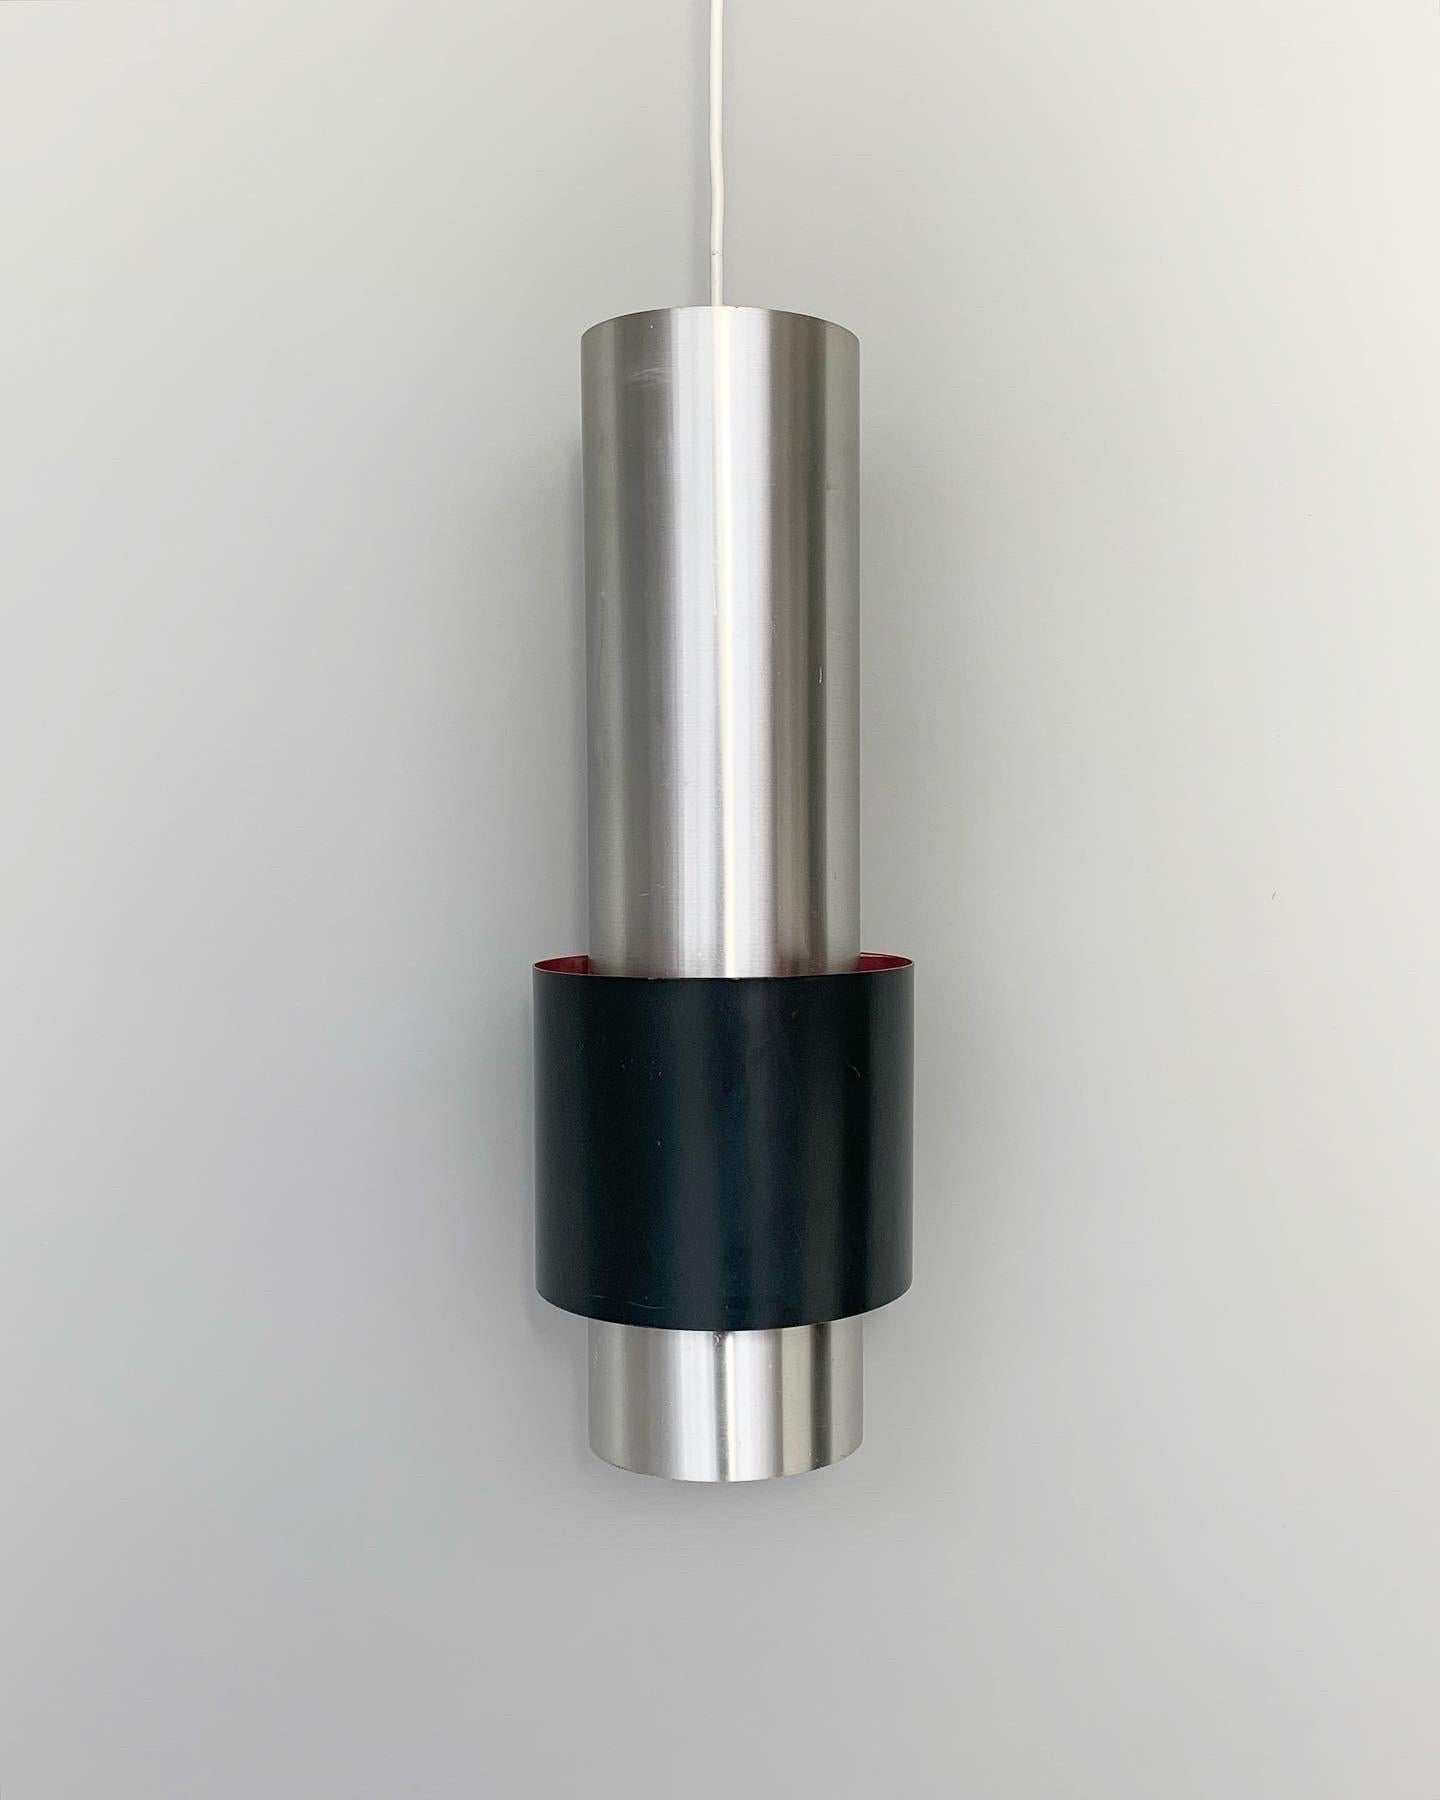 Zenith pendant light designed by Jo Hammerborg for Fog & Mørup in the 1960s in Denmark.

Made of brushed aluminum and anthracite lacquered steel, pink lacquered interior. Remains the original manufacturers sticker.

Measures: Height: 40